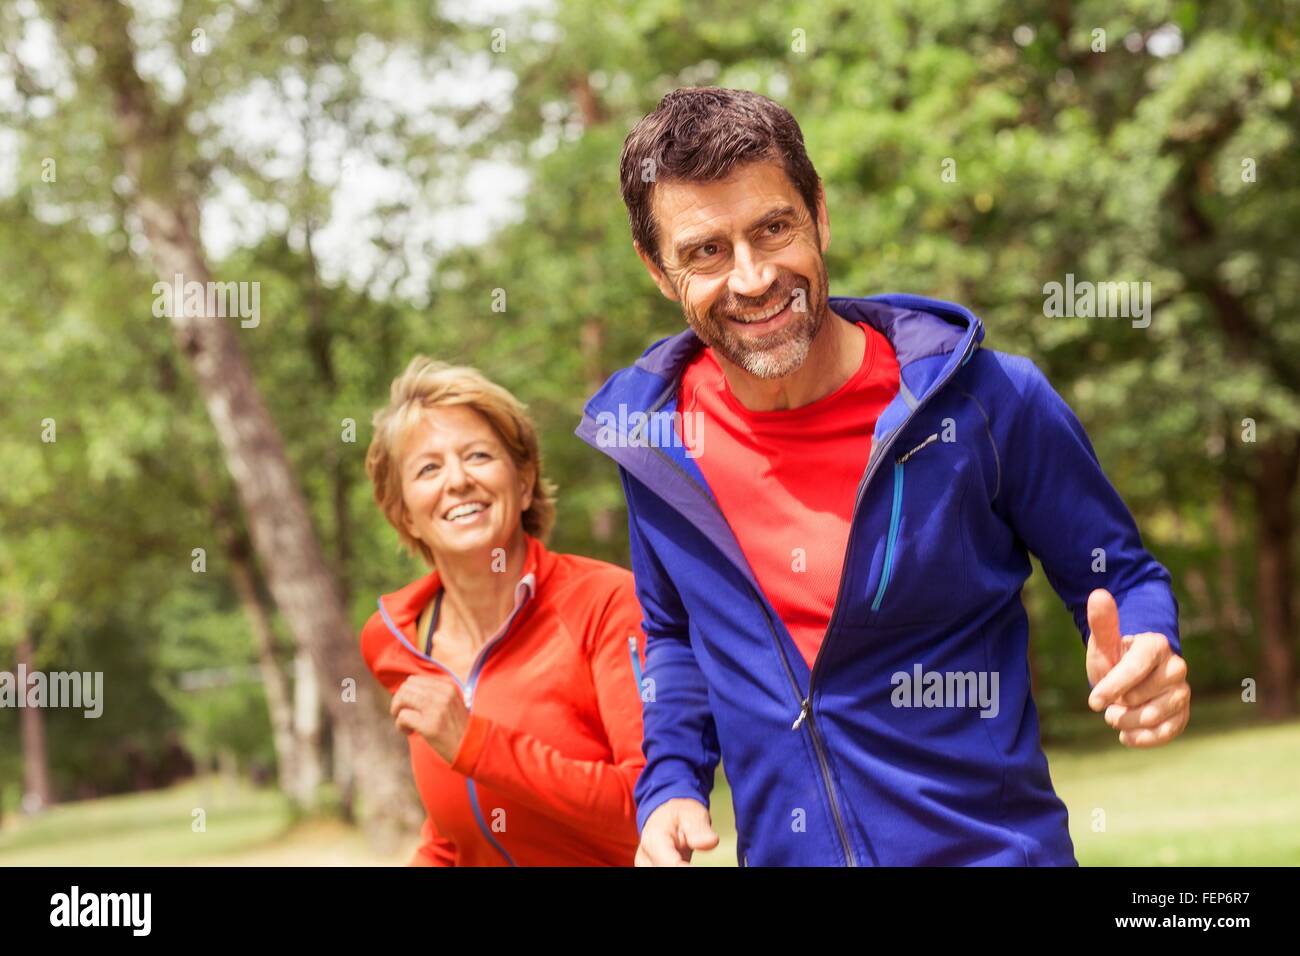 Couple running outdoors, smiling Stock Photo